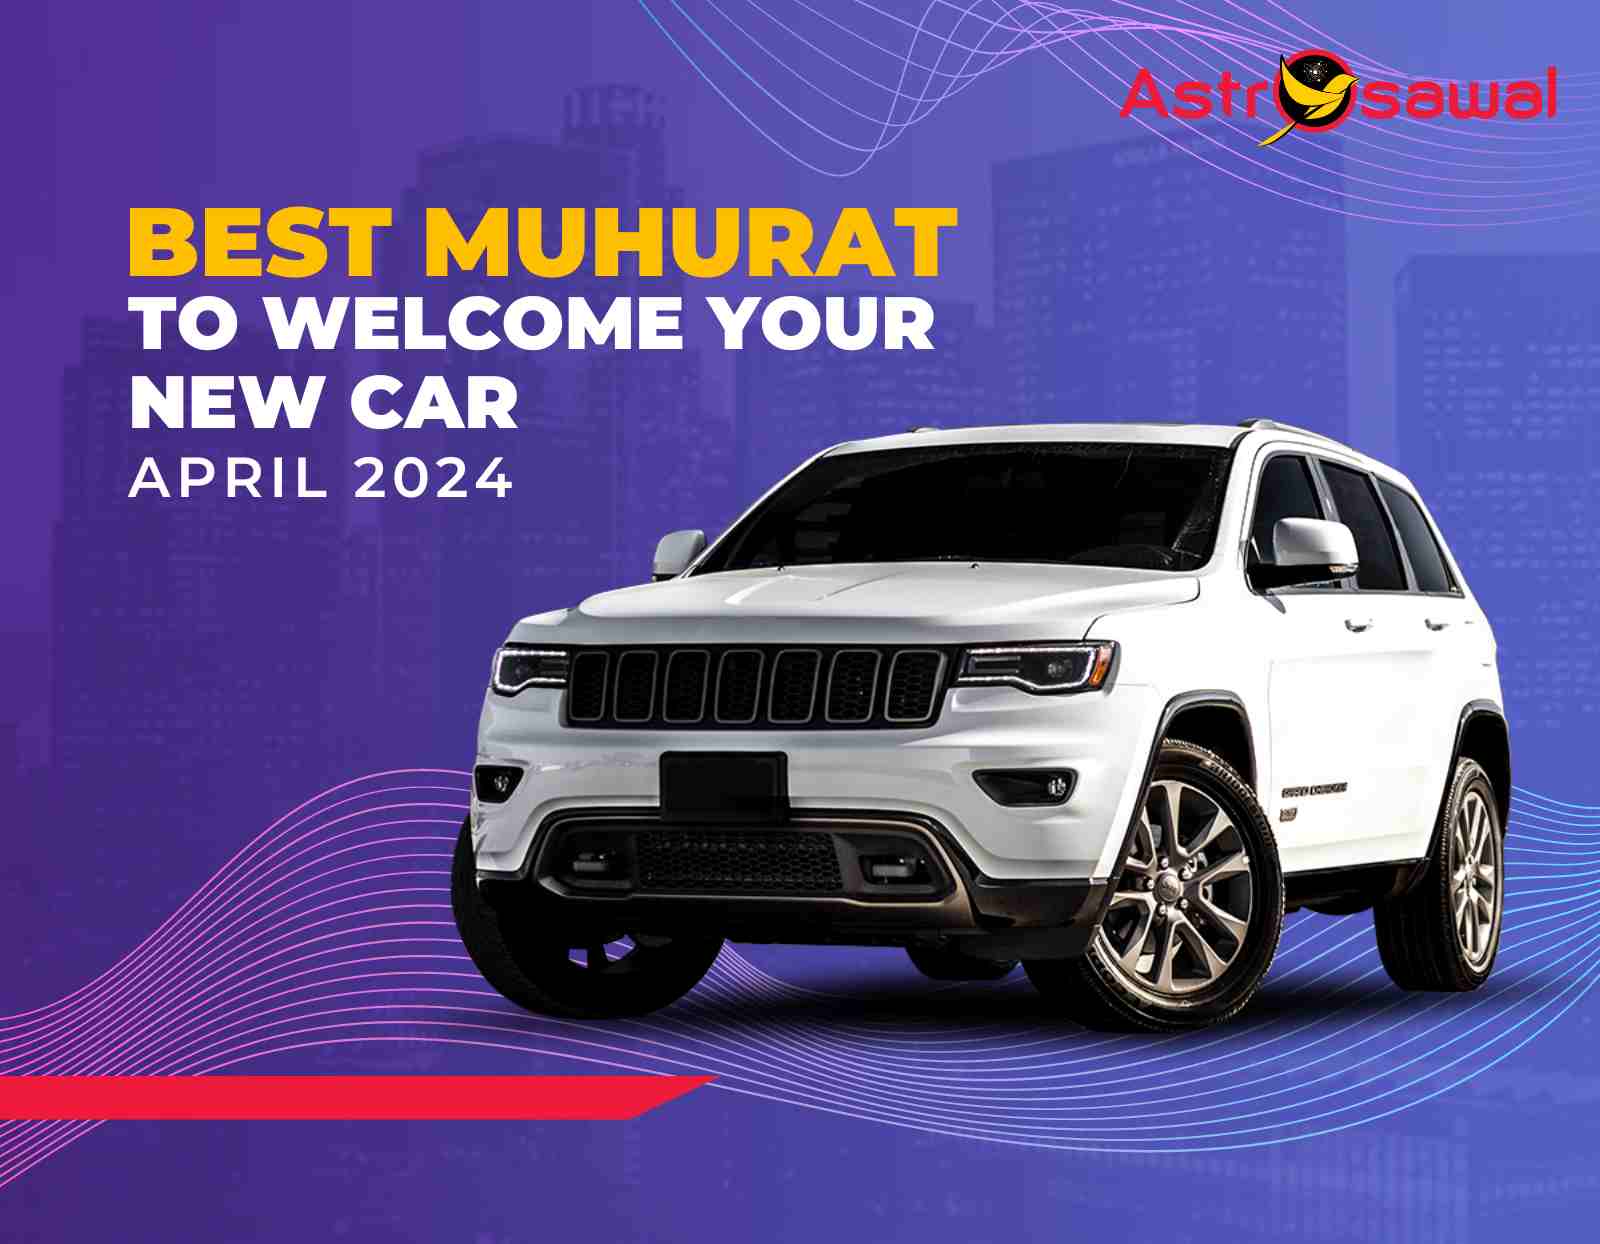 Choosing the Best Muhurat to Welcome Your New Car in April 2024